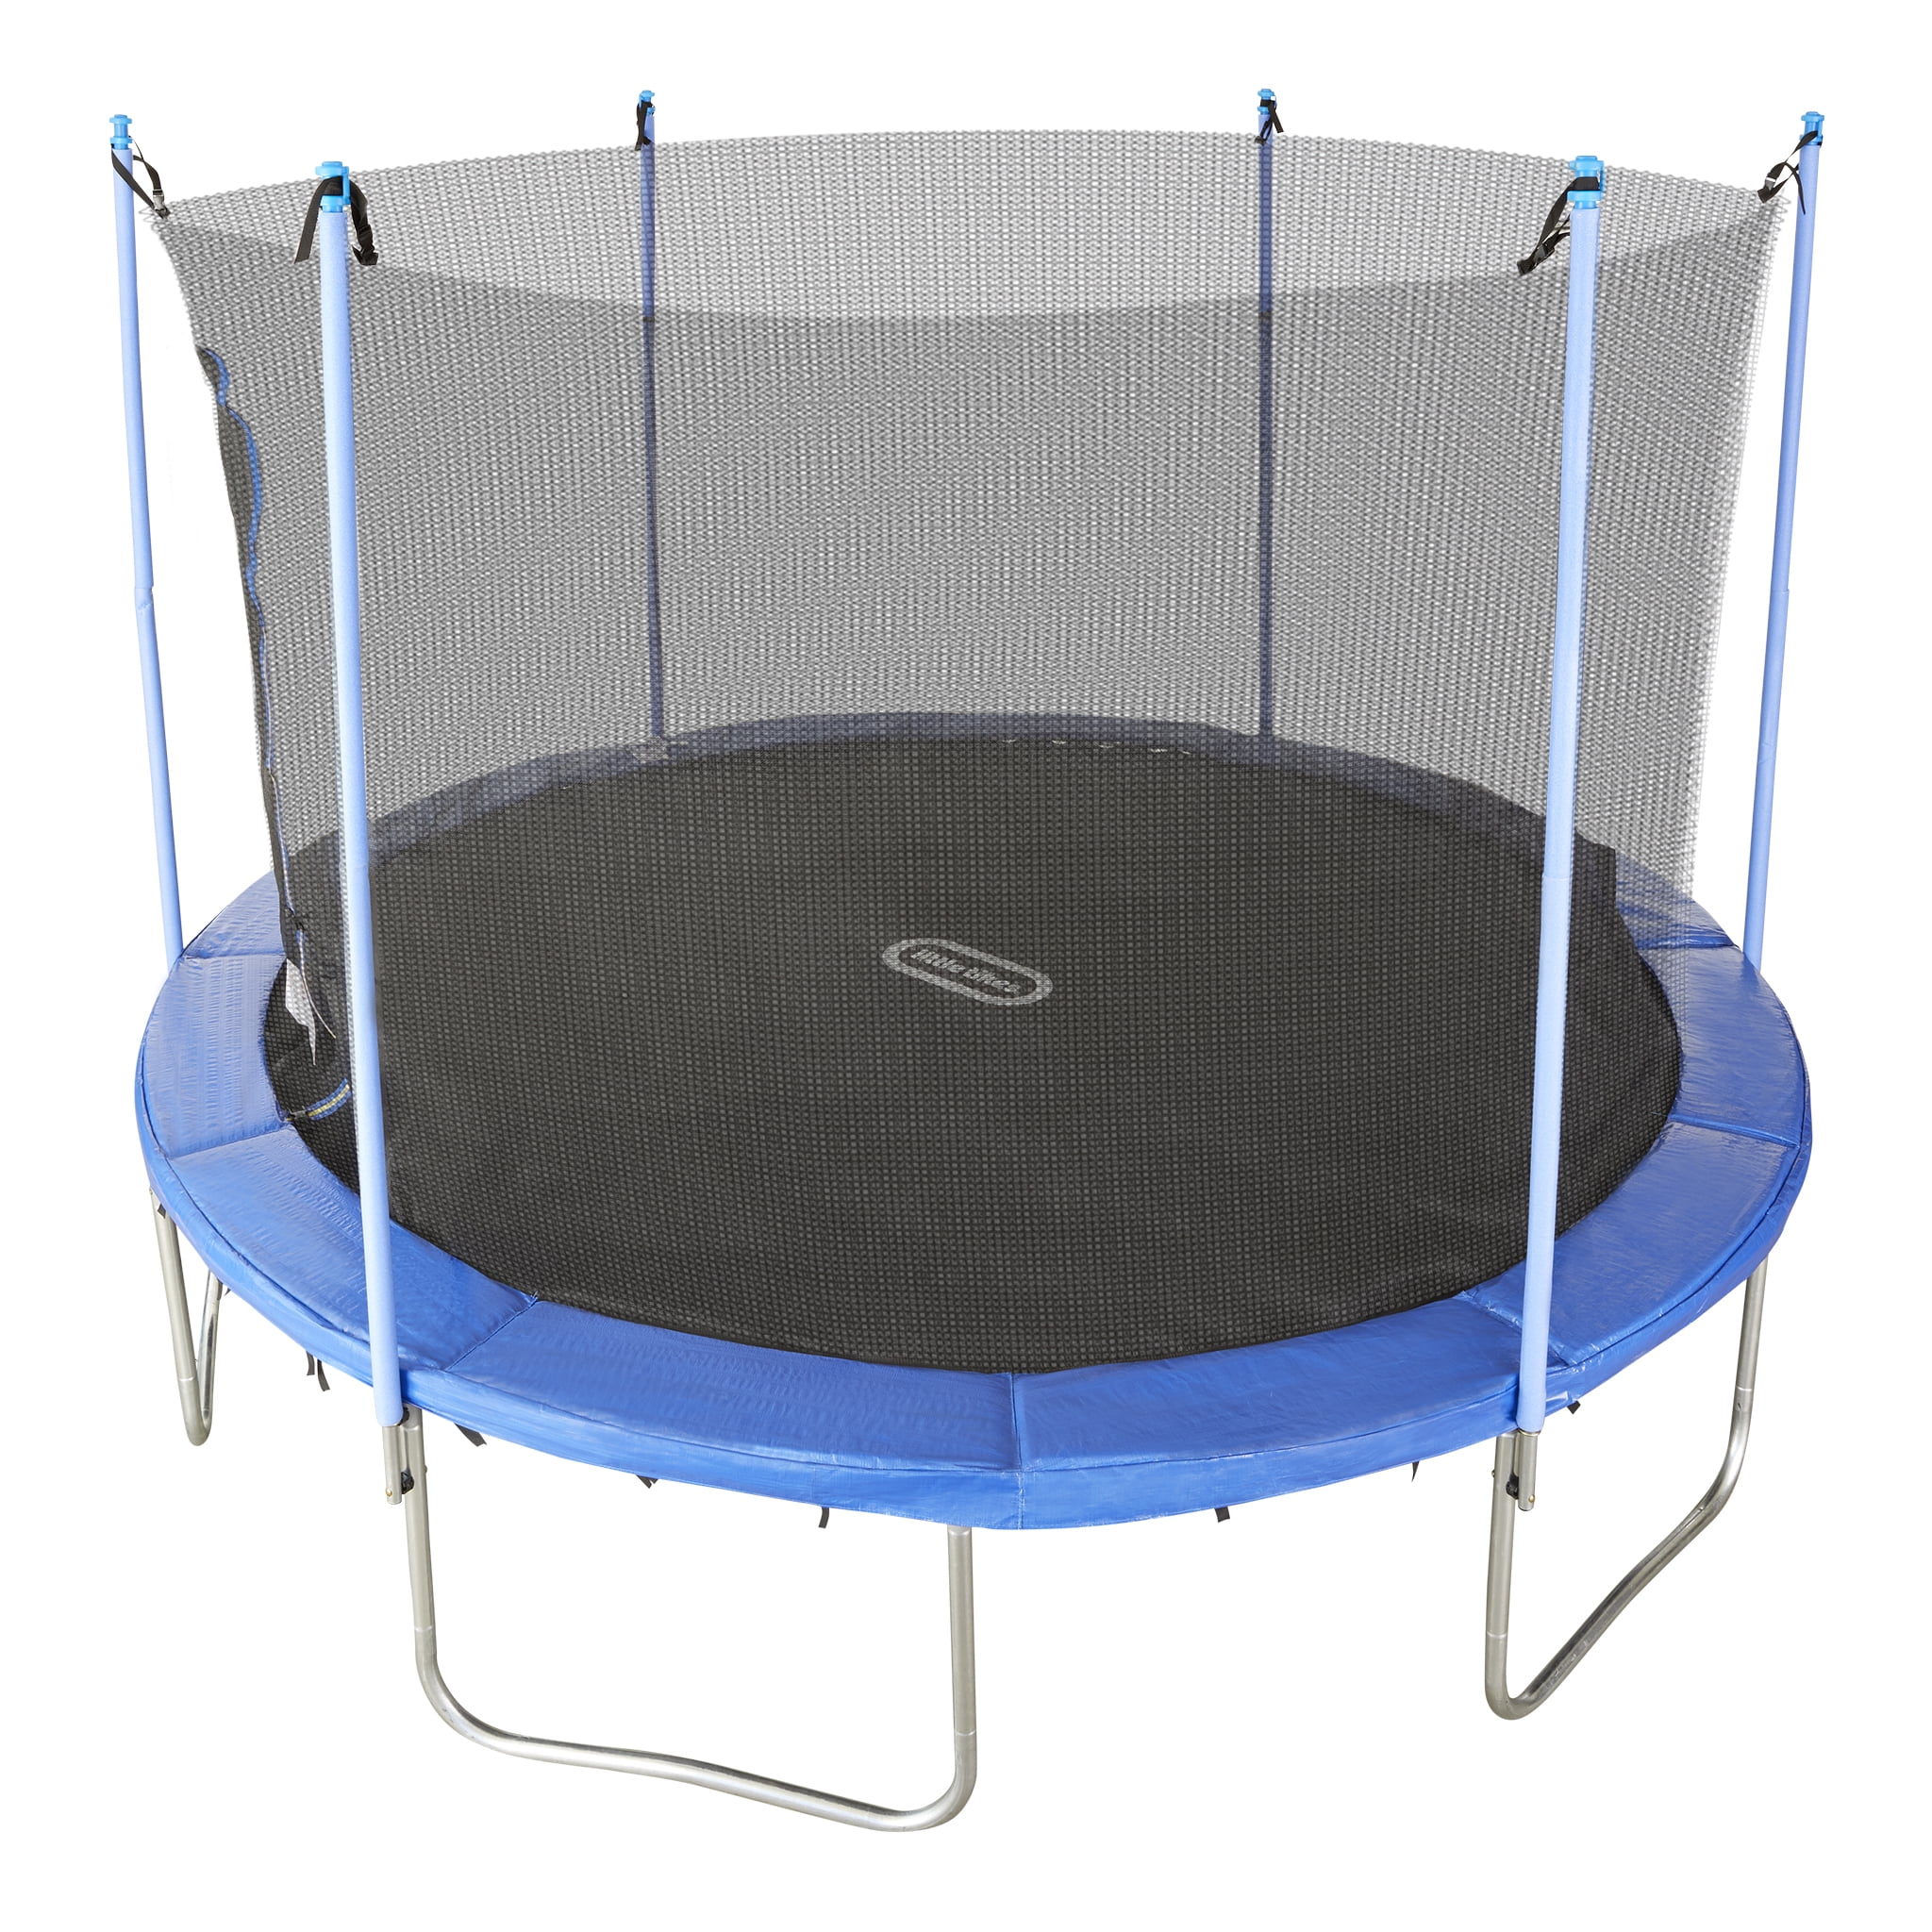 Radio Flyer, Game Time Interactive Kids' Trampoline with Lights & Sounds,  3-Feet Diameter